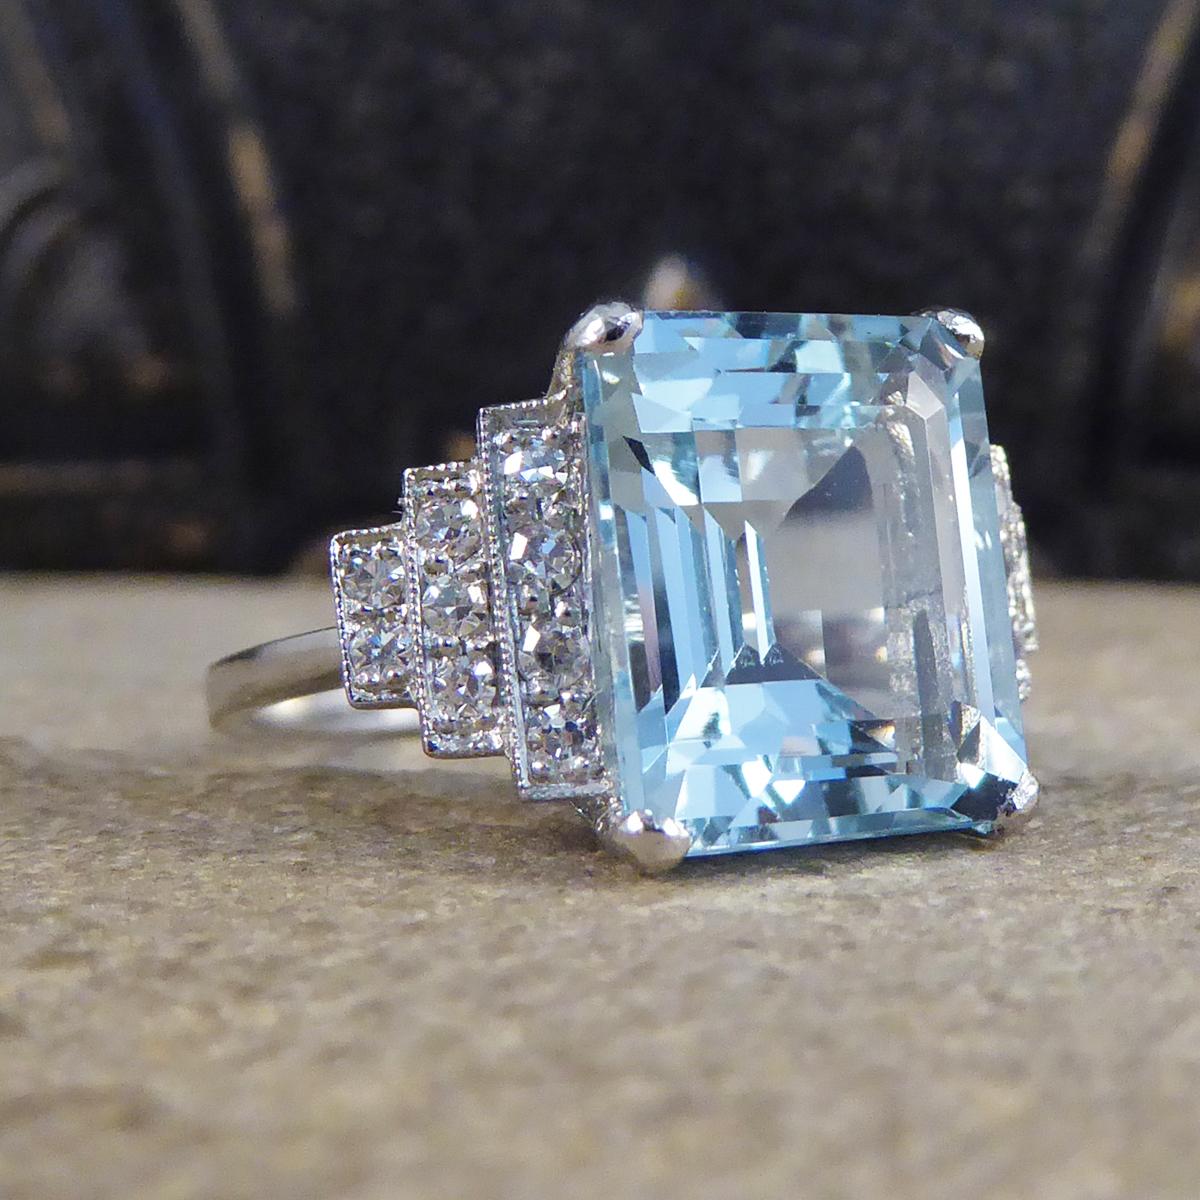 This absolutely stunning ring features a mesmerising 5.50ct Emerald Cut Aquamarine. On either shoulder sit a horizontal pyramid of brilliant cut Diamonds, from closest to the Aqua leading to three then two Diamonds adding sparkle to an already